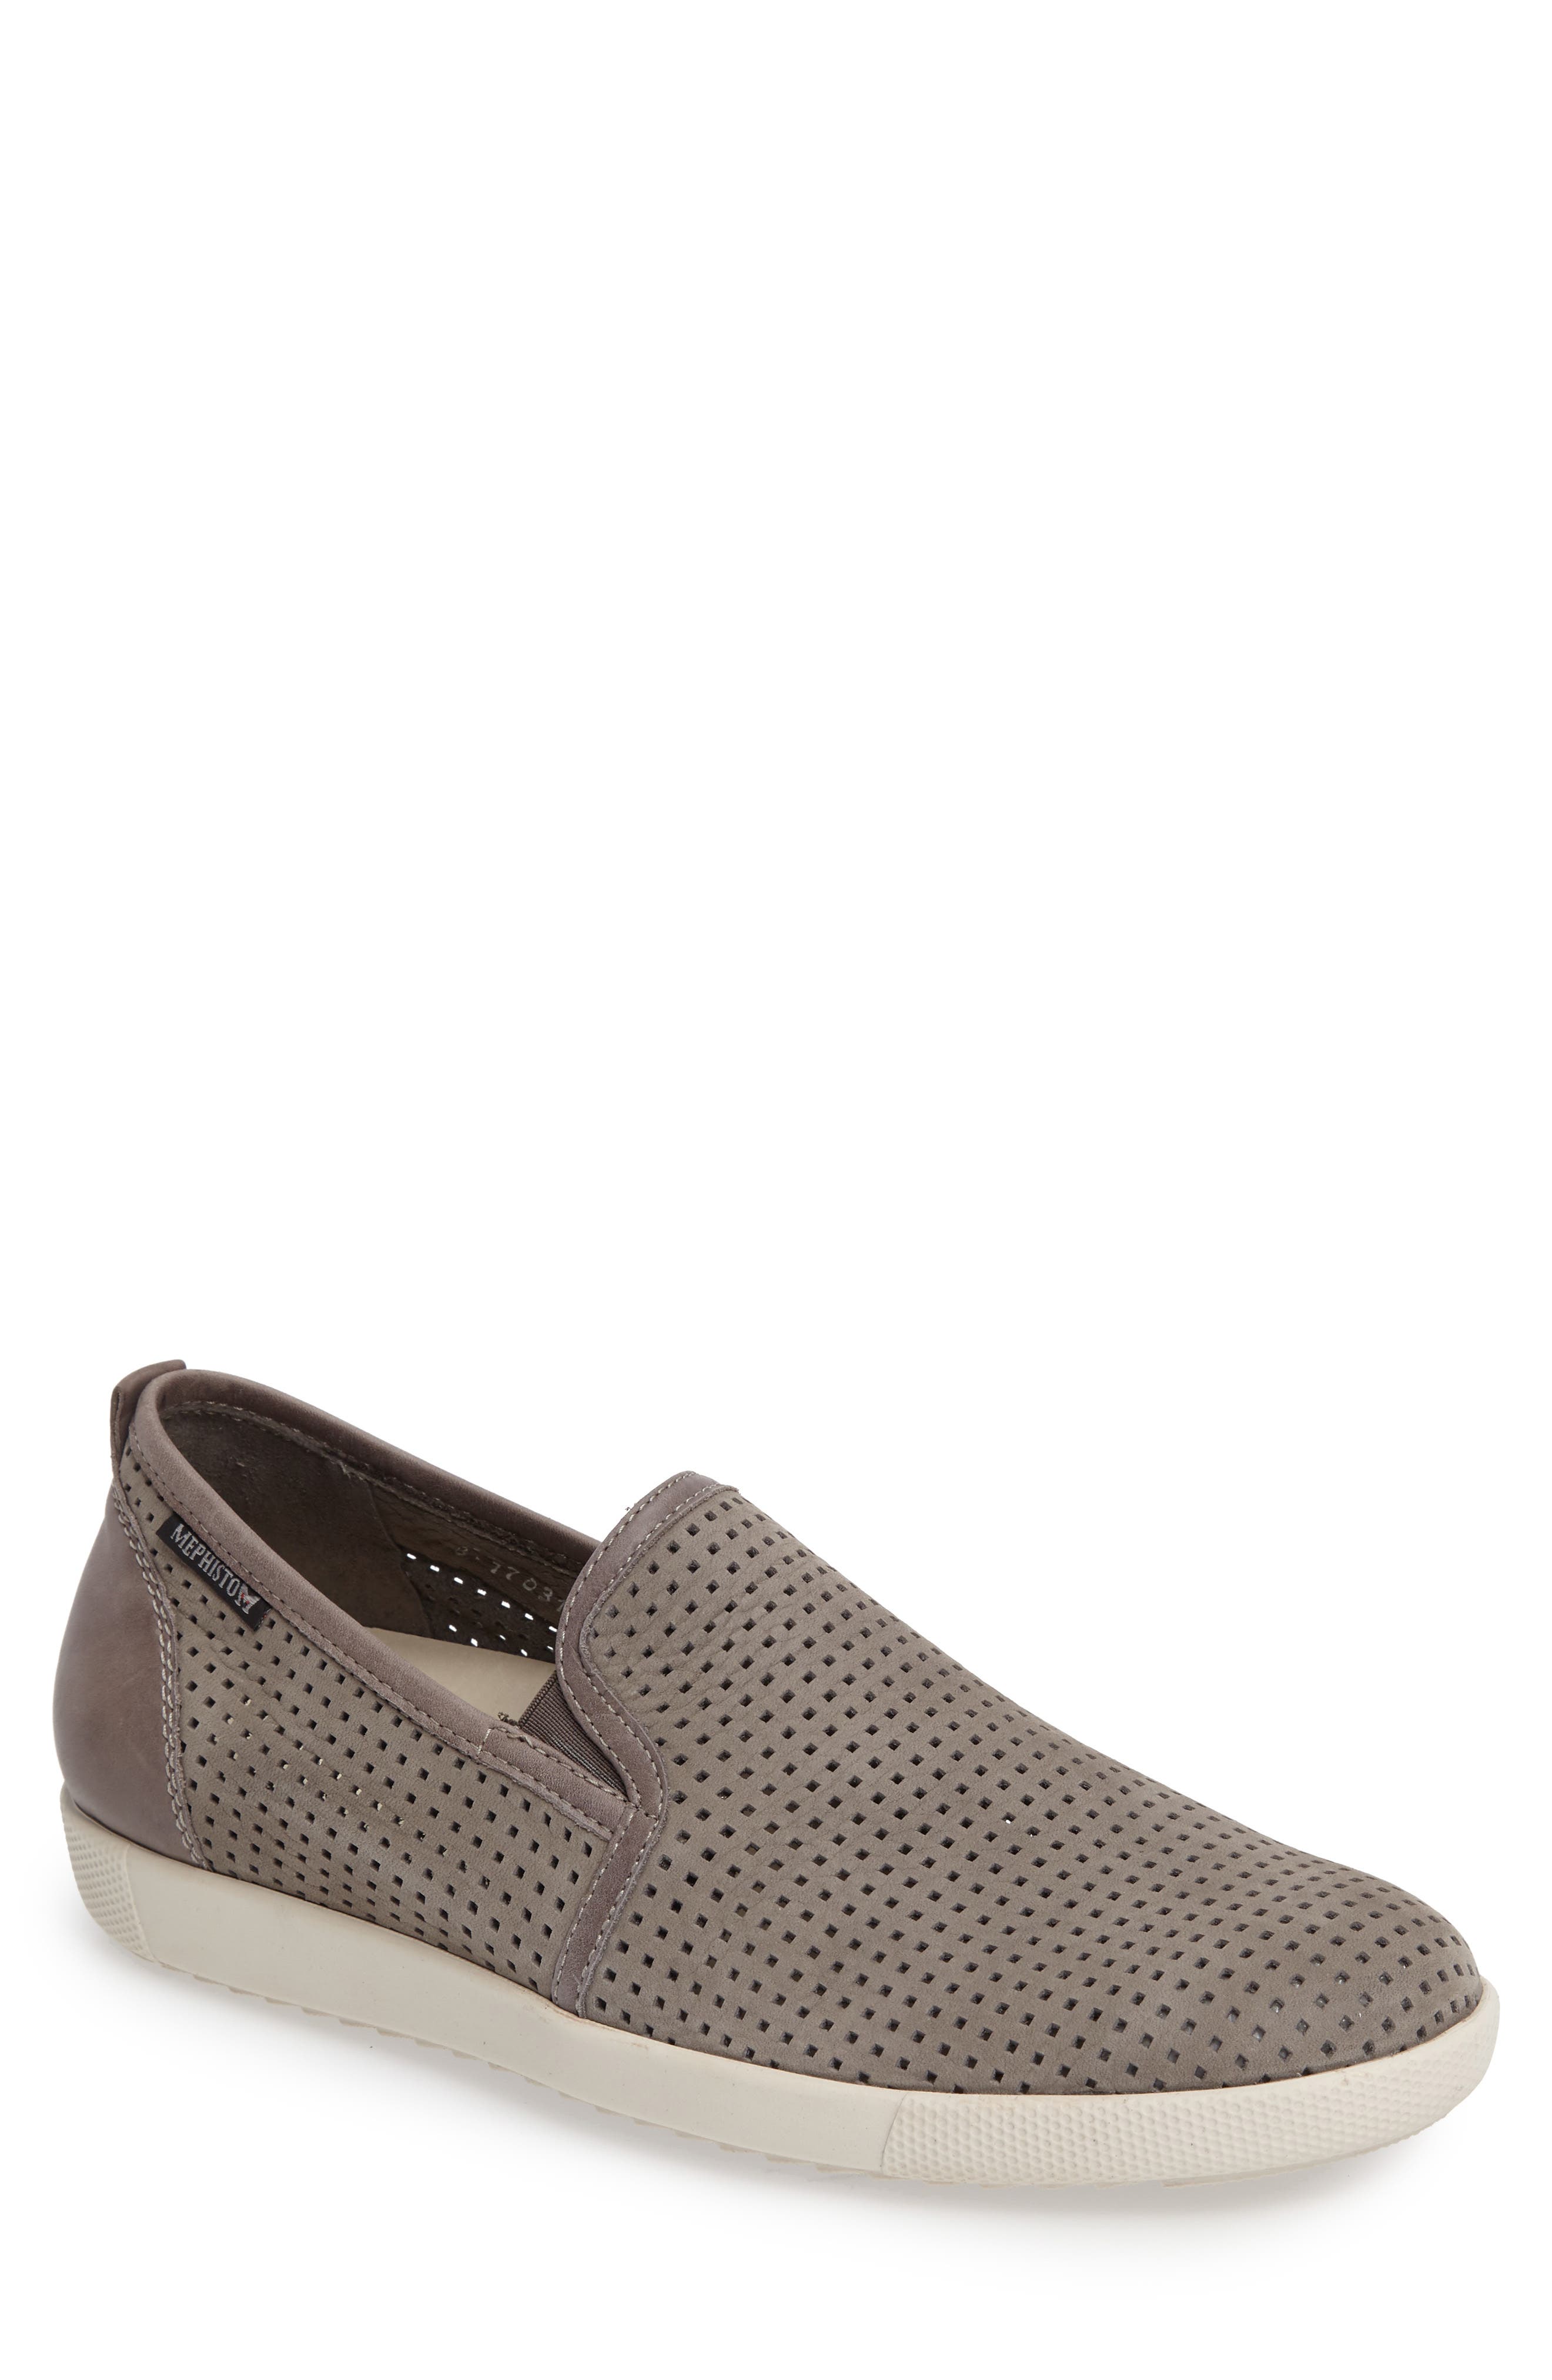 mens perforated leather slip on shoes